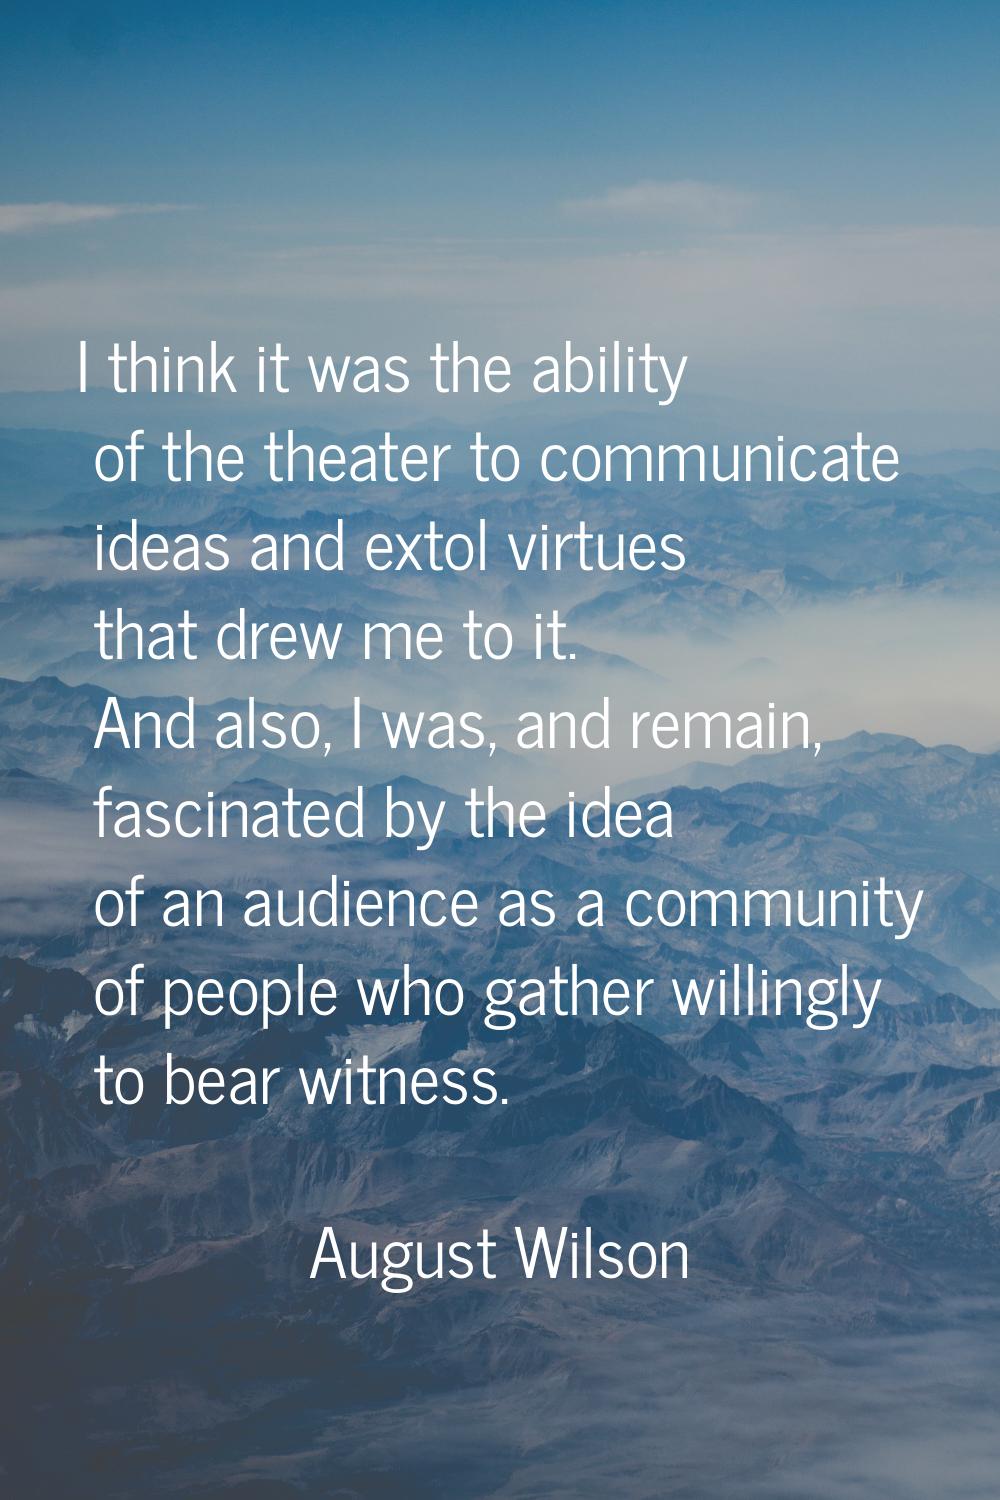 I think it was the ability of the theater to communicate ideas and extol virtues that drew me to it